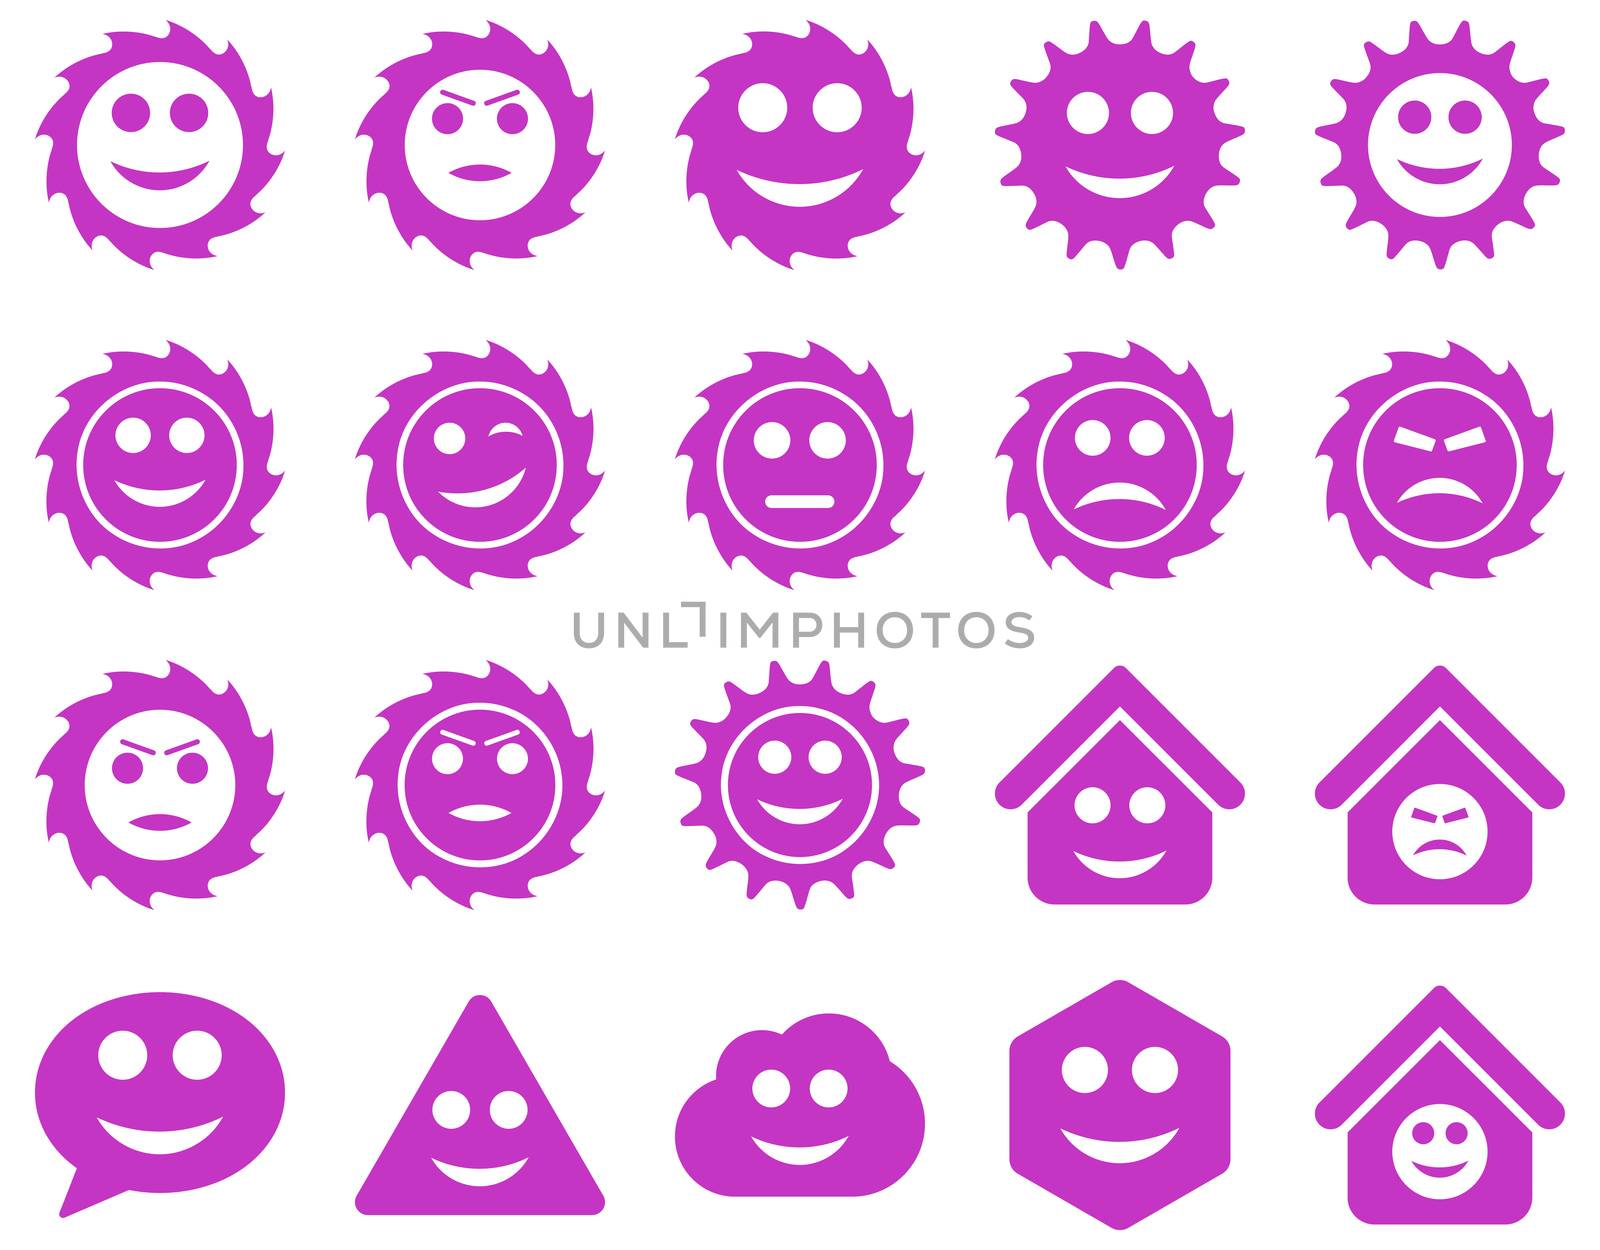 Tools, gears, smiles, emotions icons. Glyph set style is flat images, violet symbols, isolated on a white background.